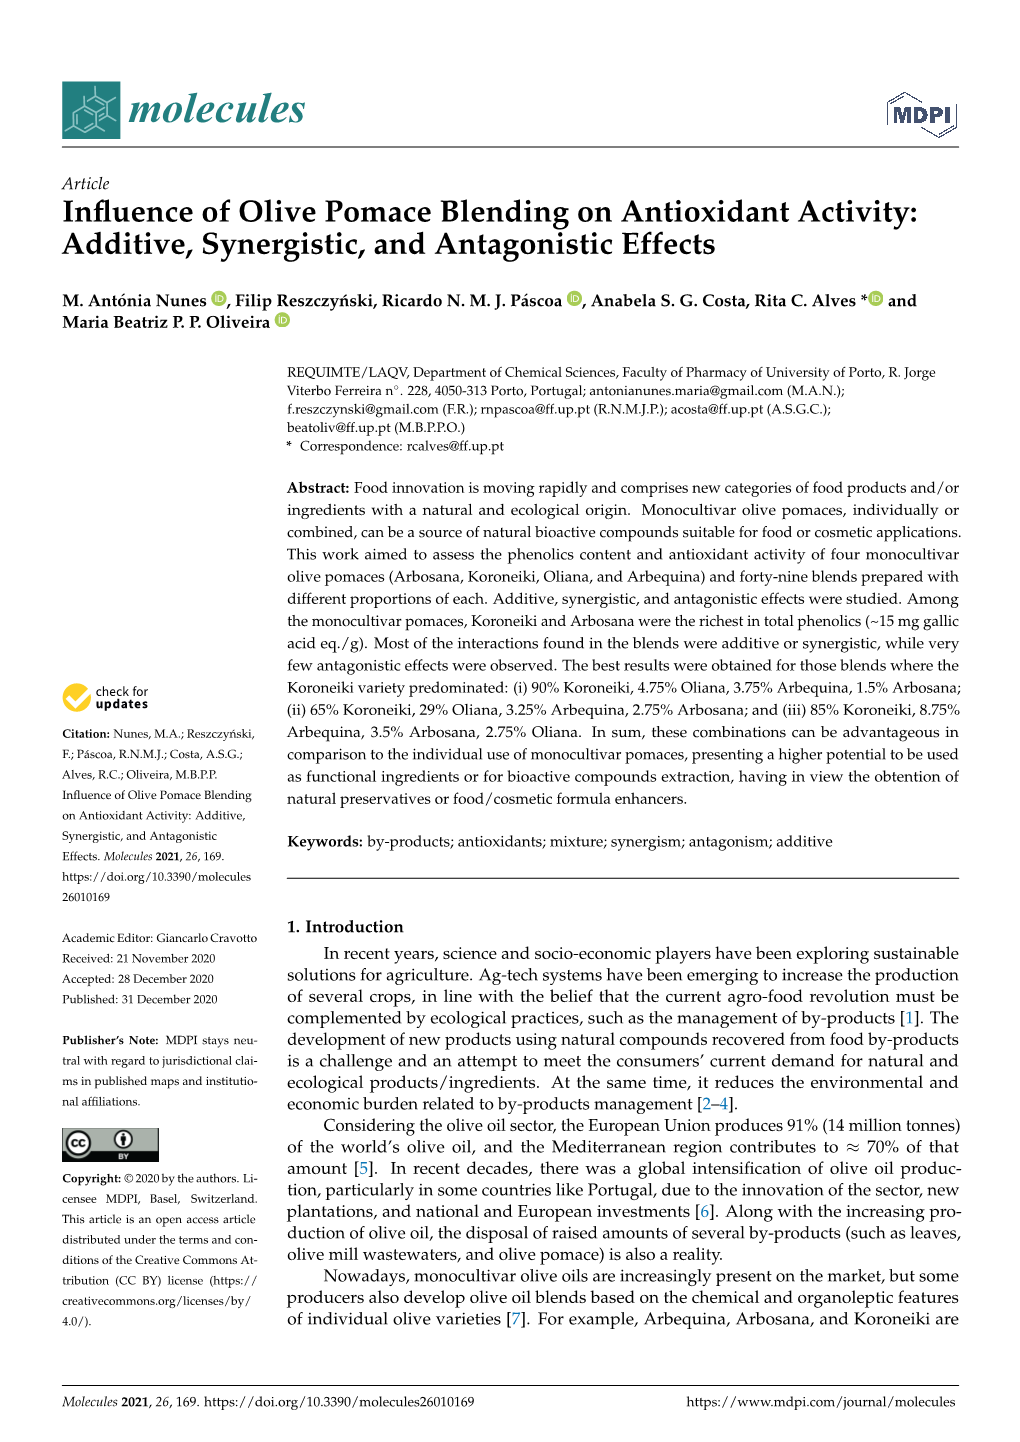 Additive, Synergistic, and Antagonistic Effects